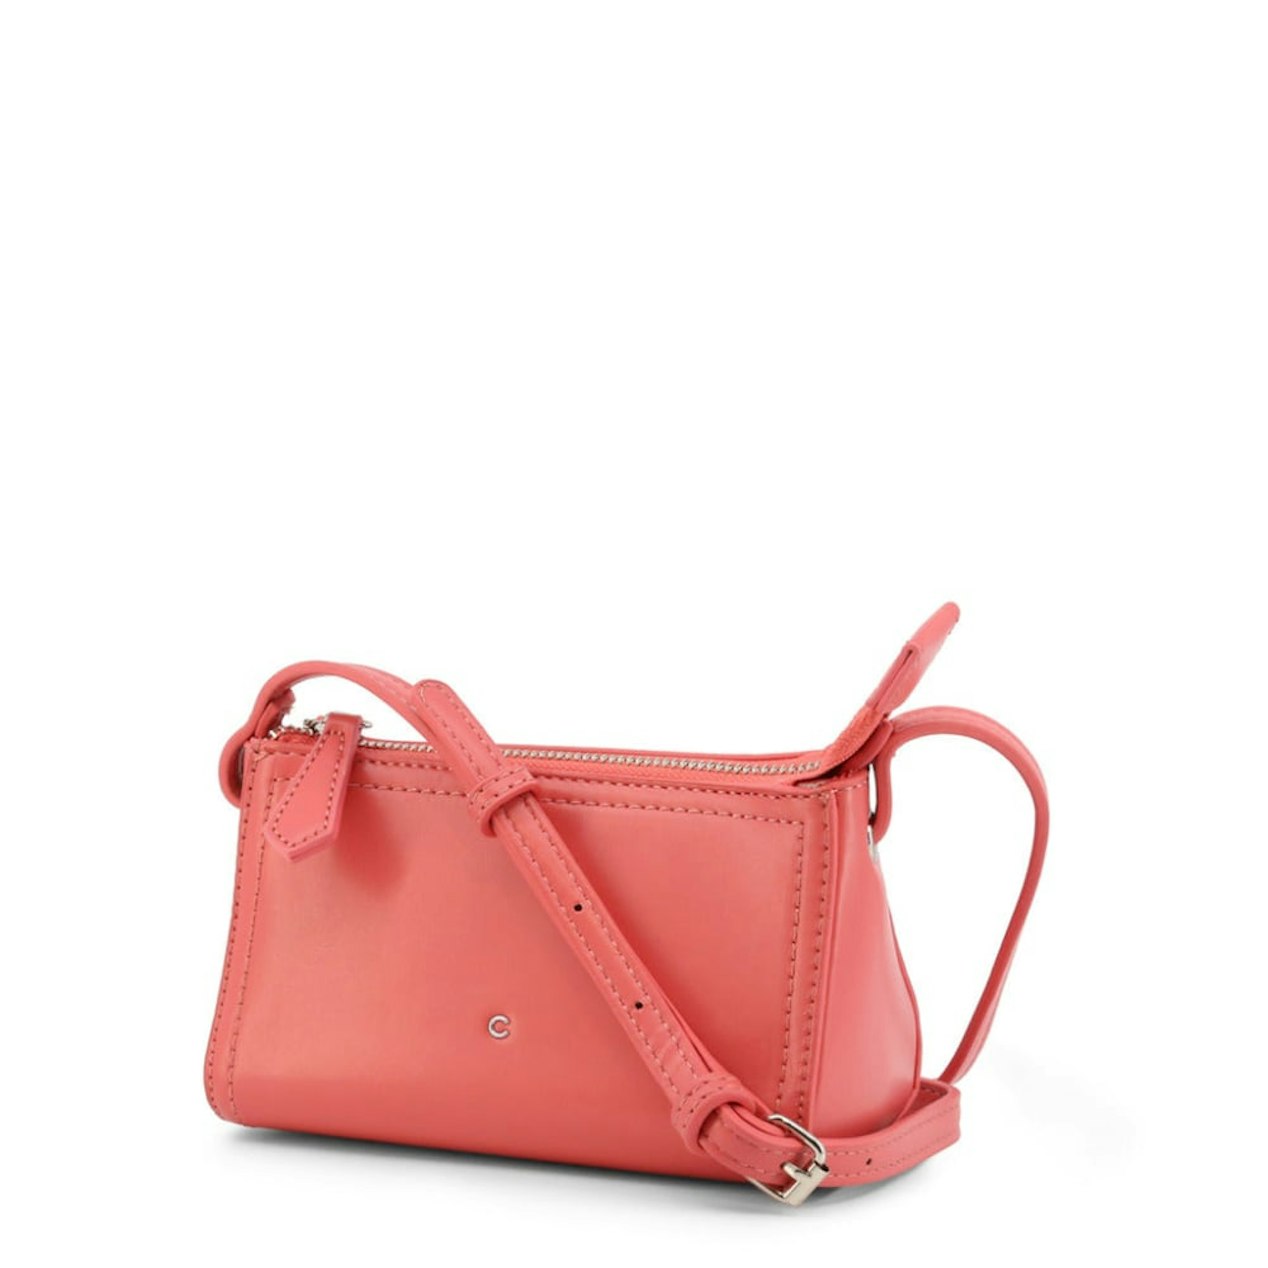 Carrera Jeans Crossbody Bags V283pretty For Women Pink - Onceit